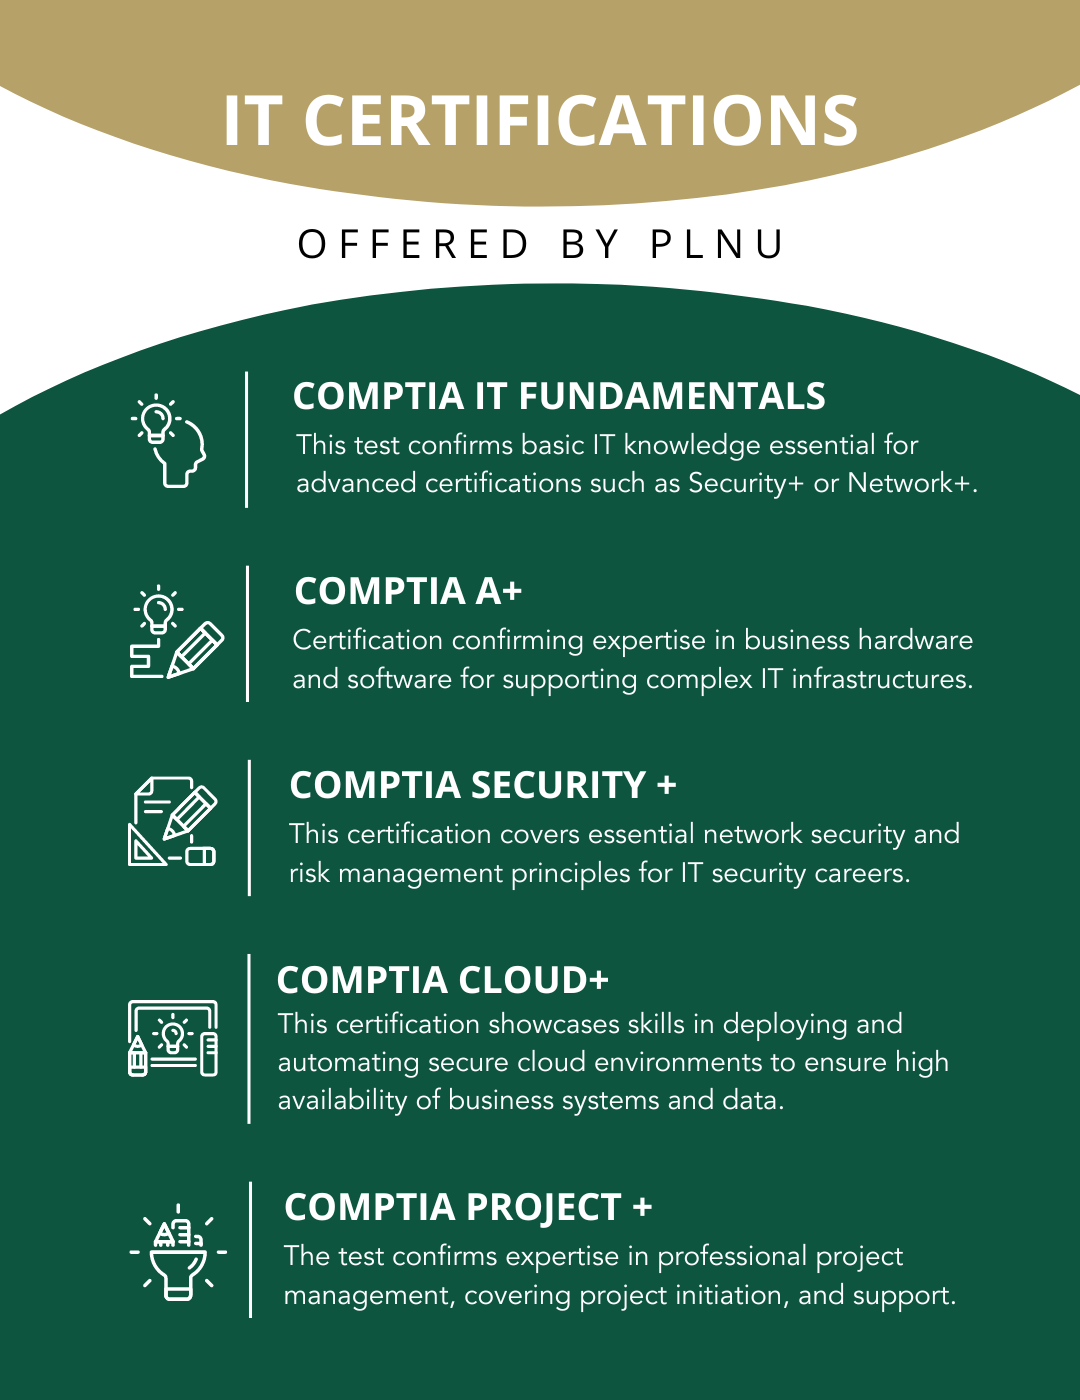 Infographic that shows IT certifications that are offered by PLNU.